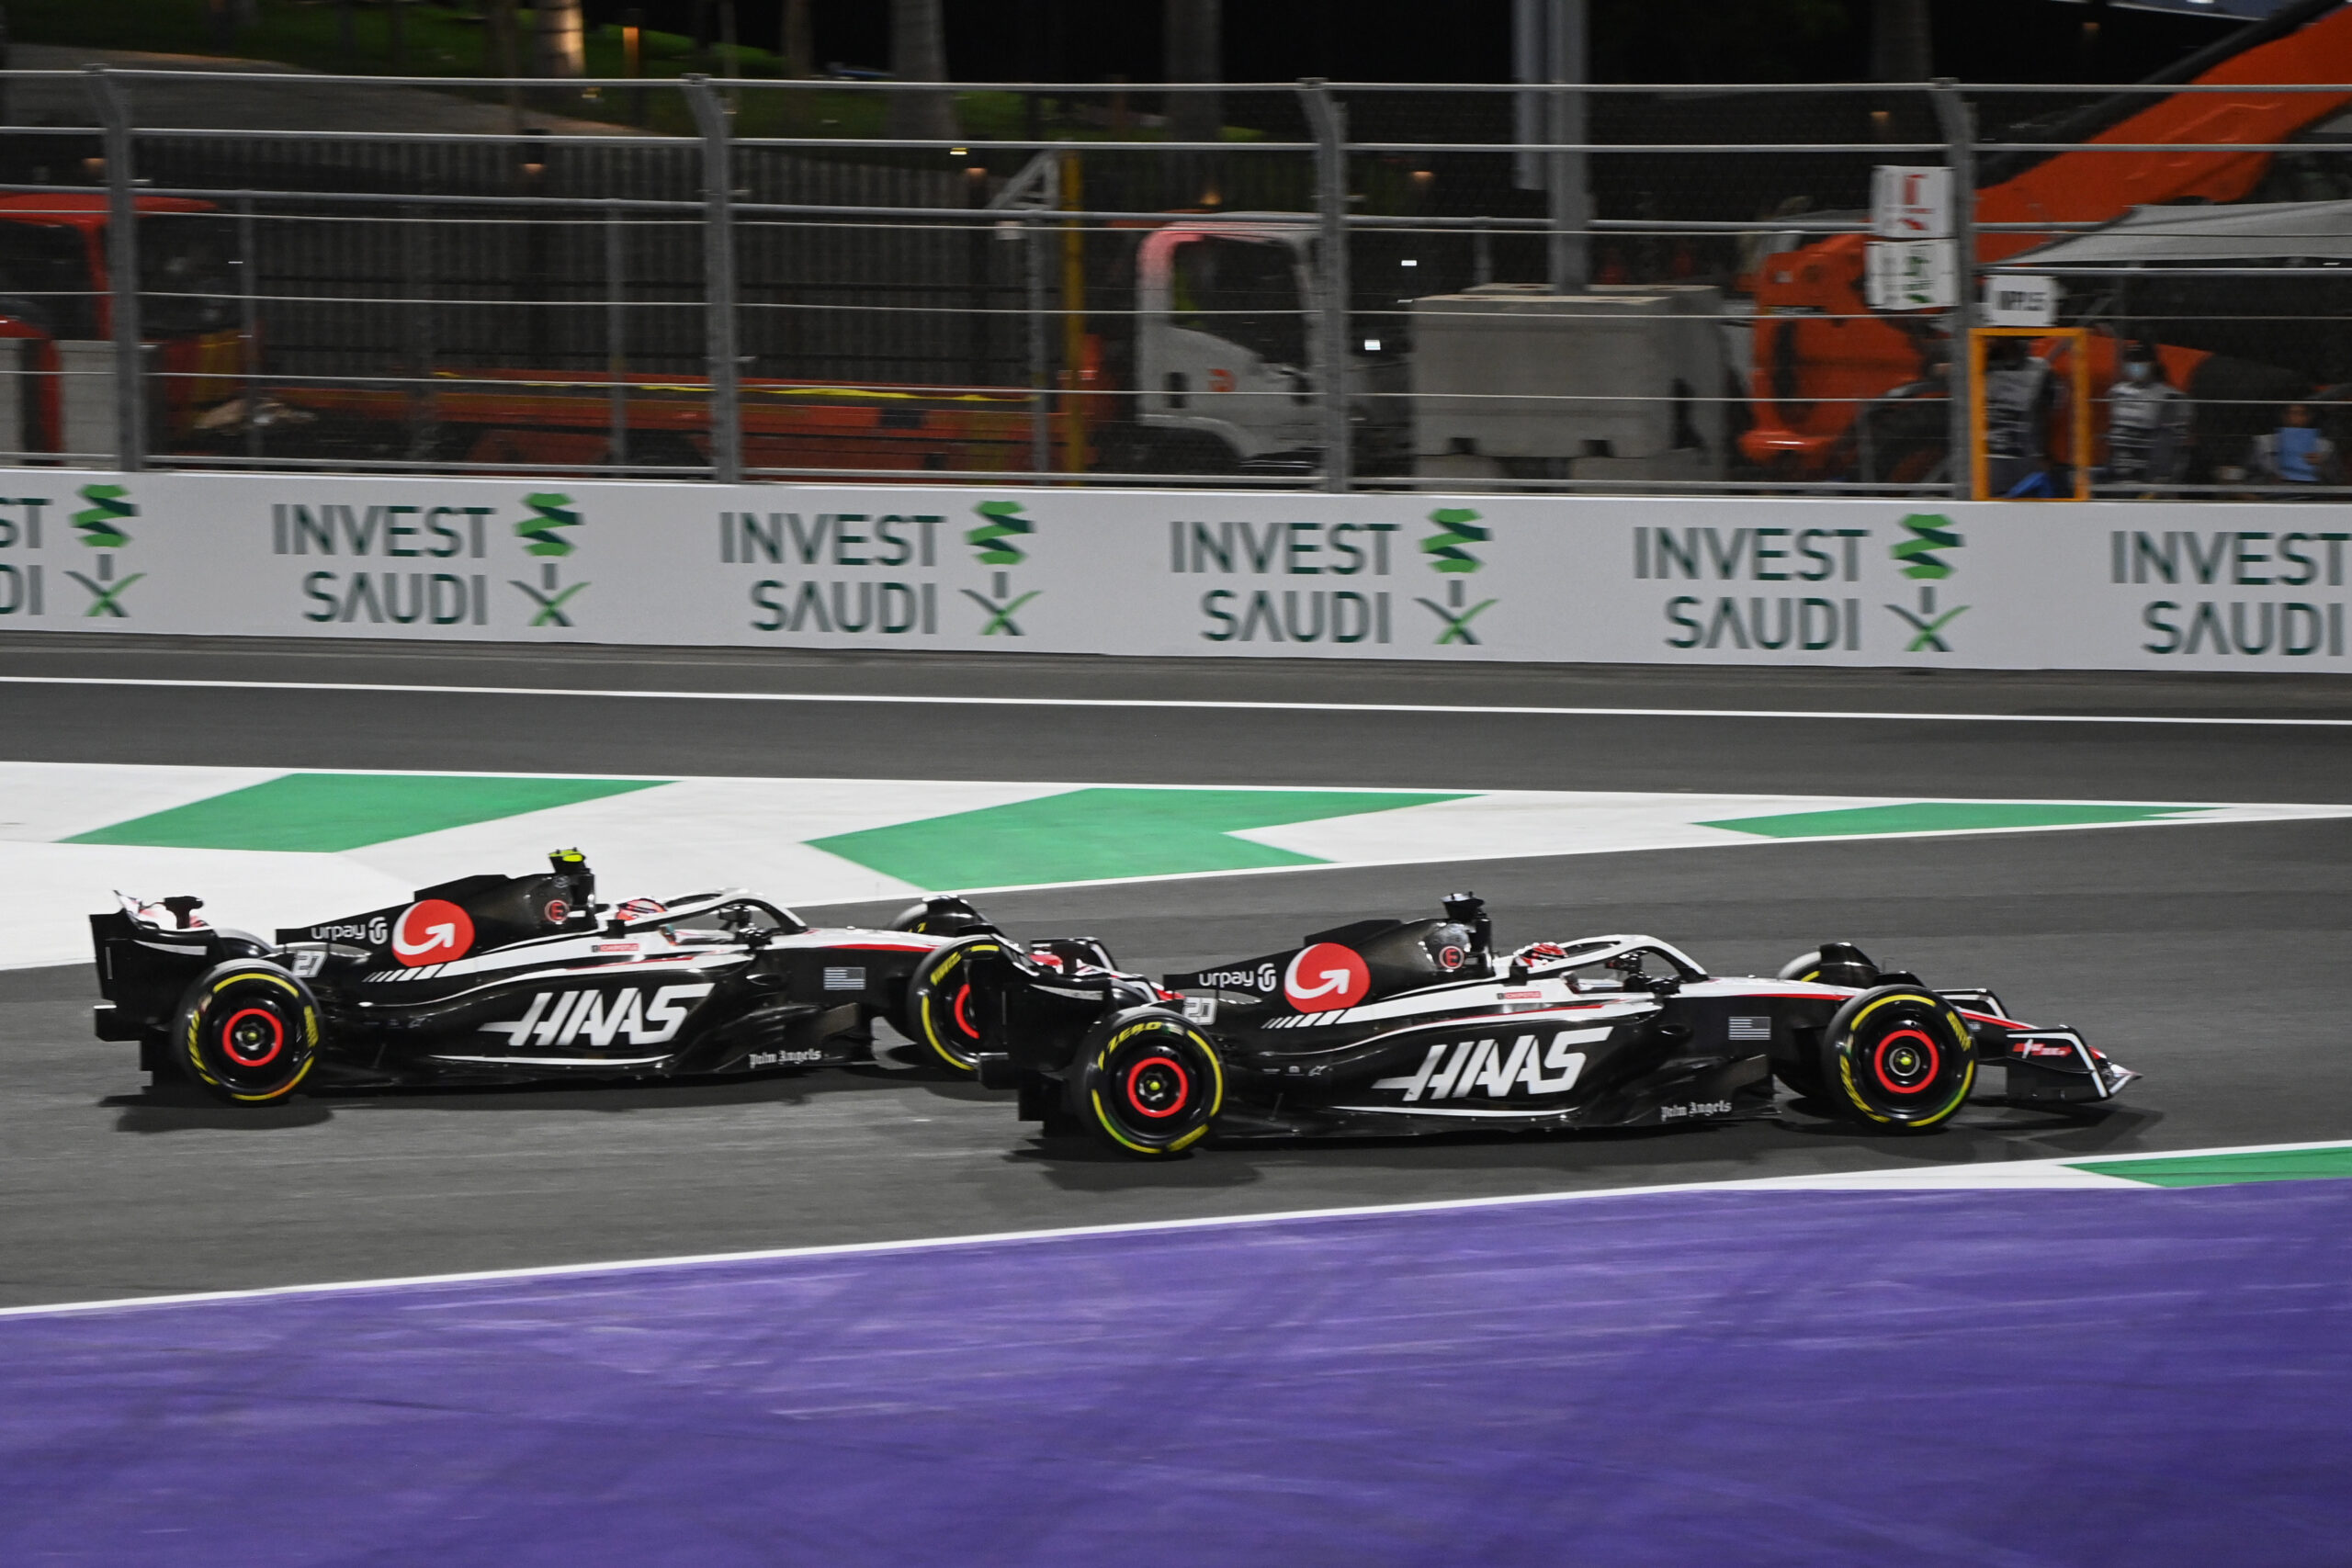 Both Haas drivers on track in Jeddah